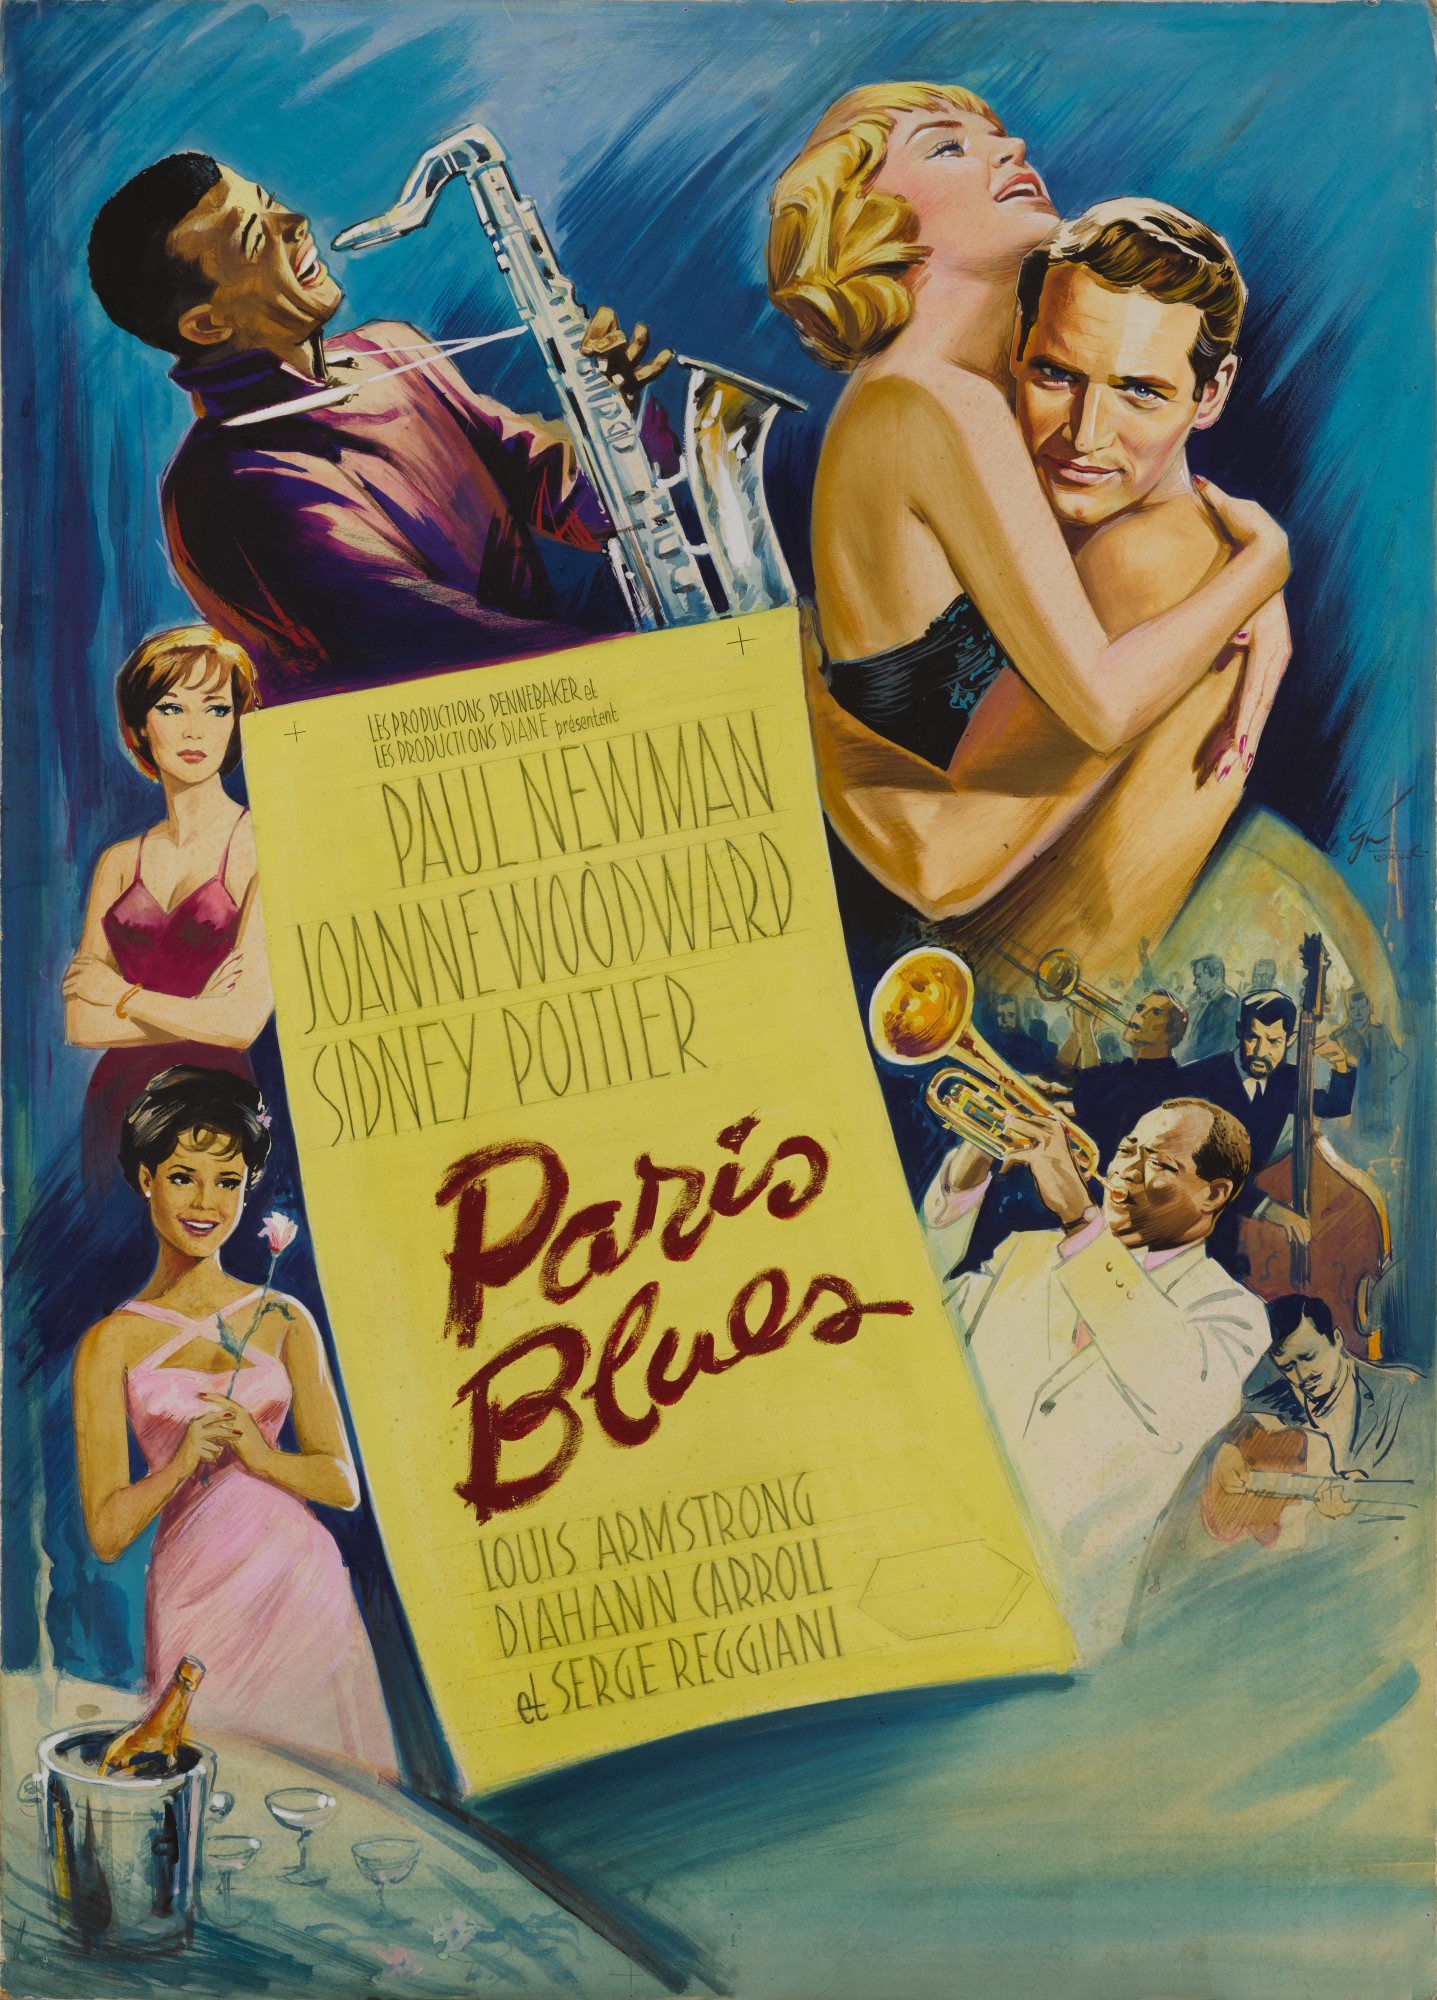 Paris Blues movie poster with Paul Newman, Sidney Poitier, Joanne Woodward, and Diahann Carroll. 